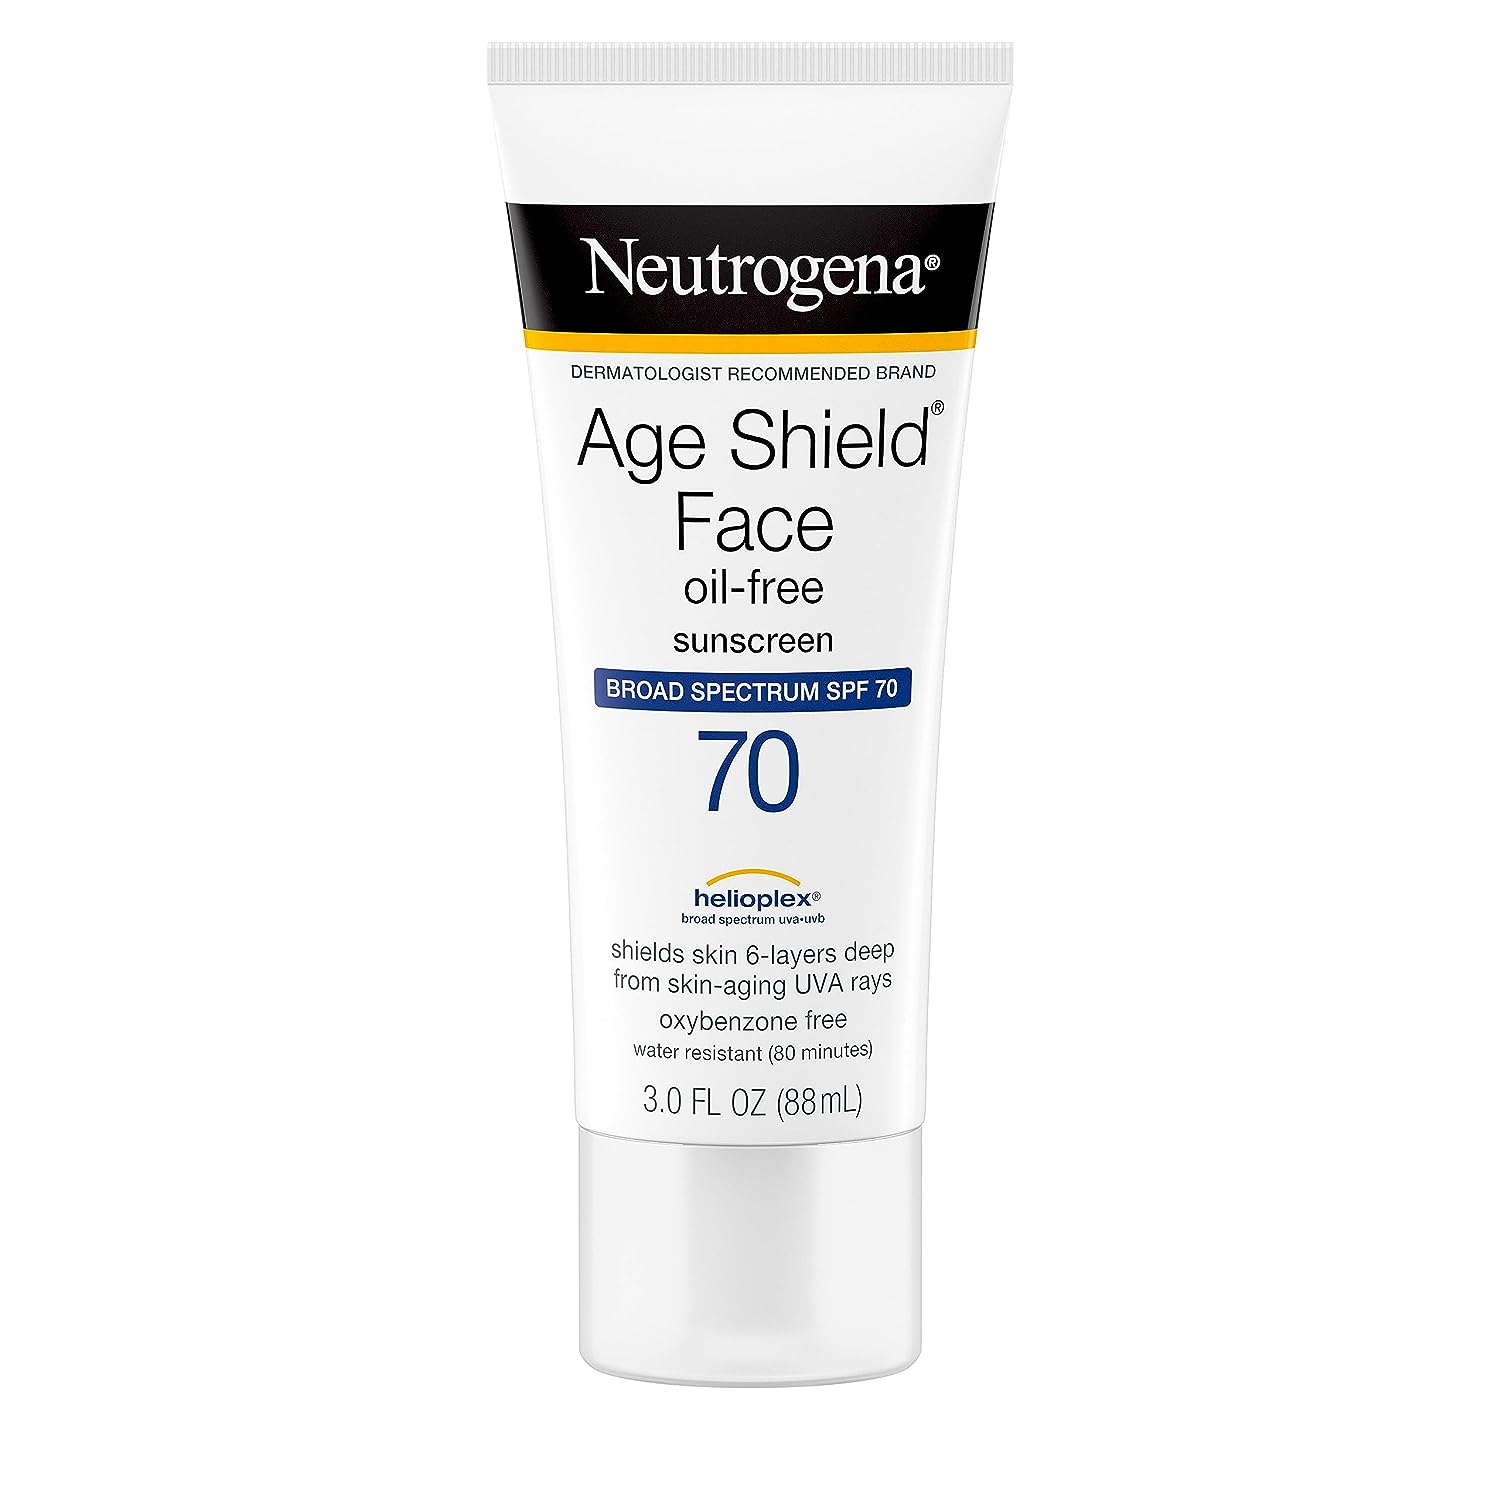 Neutrogena Age Shield Face Oil-Free Sunscreen Lotion with Broad Spectrum SPF 70, Non-Comedogenic Moisturizing Sunscreen to Help Prevent Signs of Aging, PABA-Free, 3 fl. oz (Pack of 3)